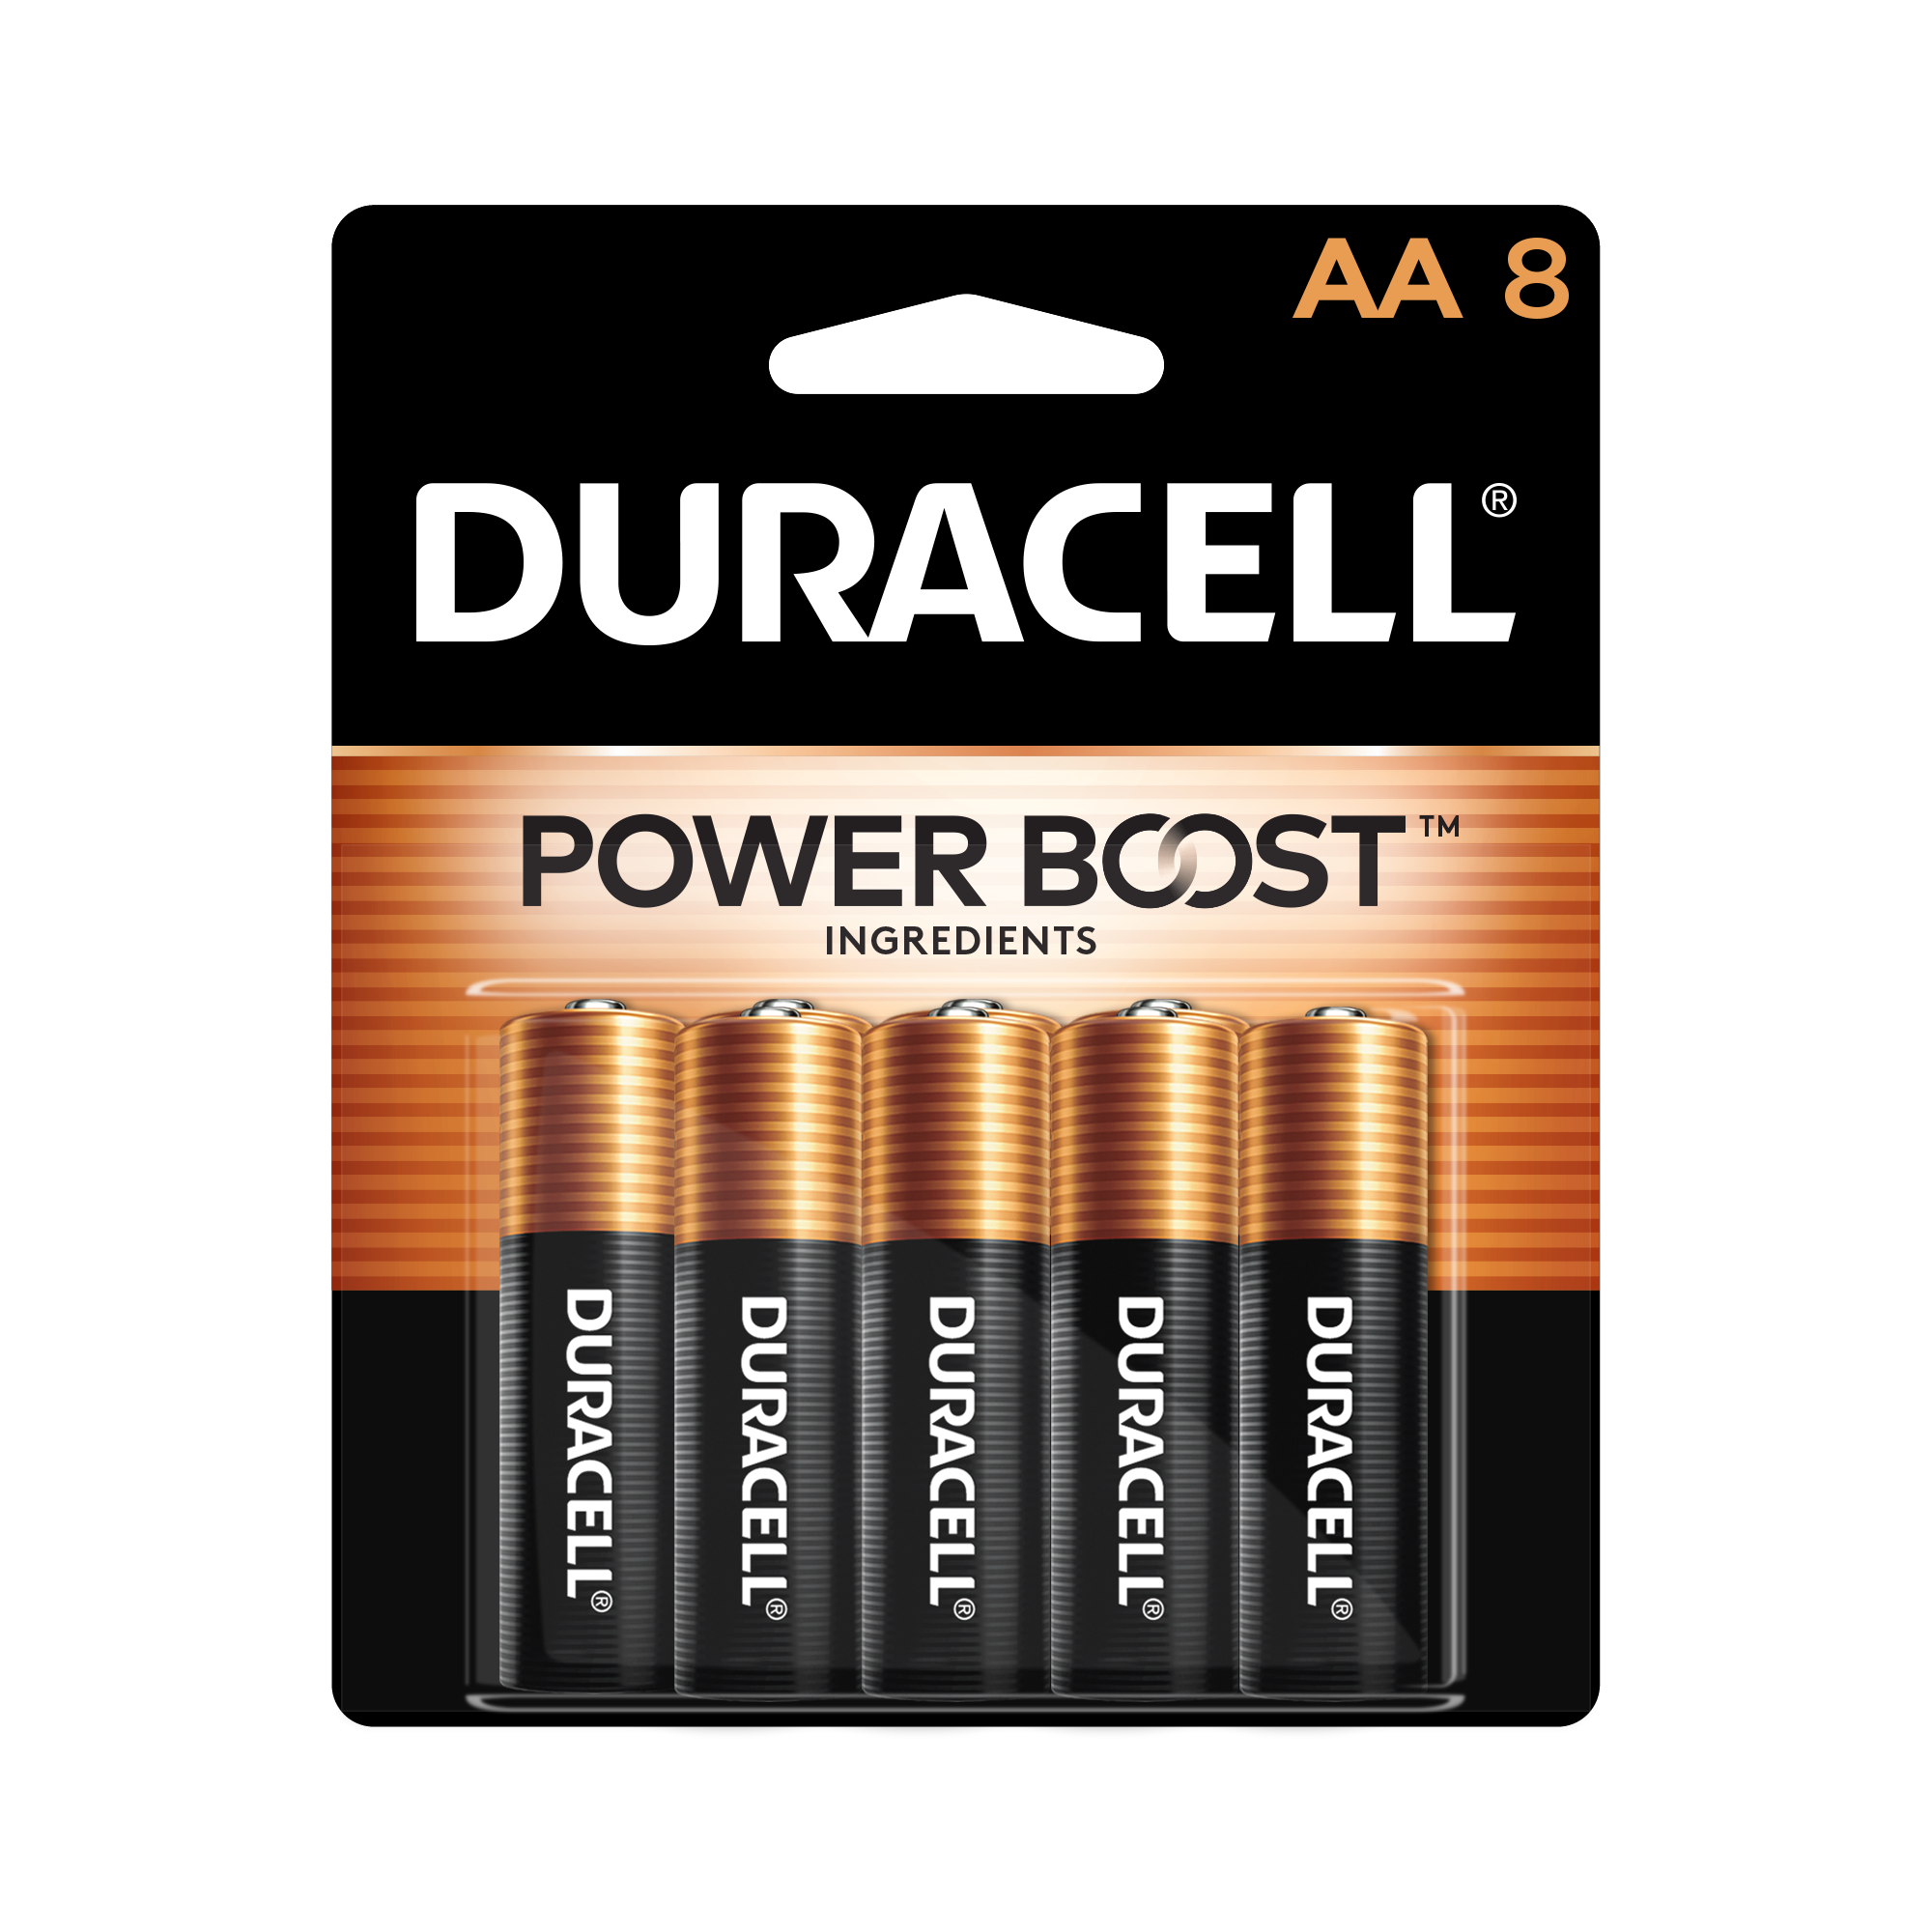 Pack 8 Pilas Recargables Duracell Aaa / Superstore